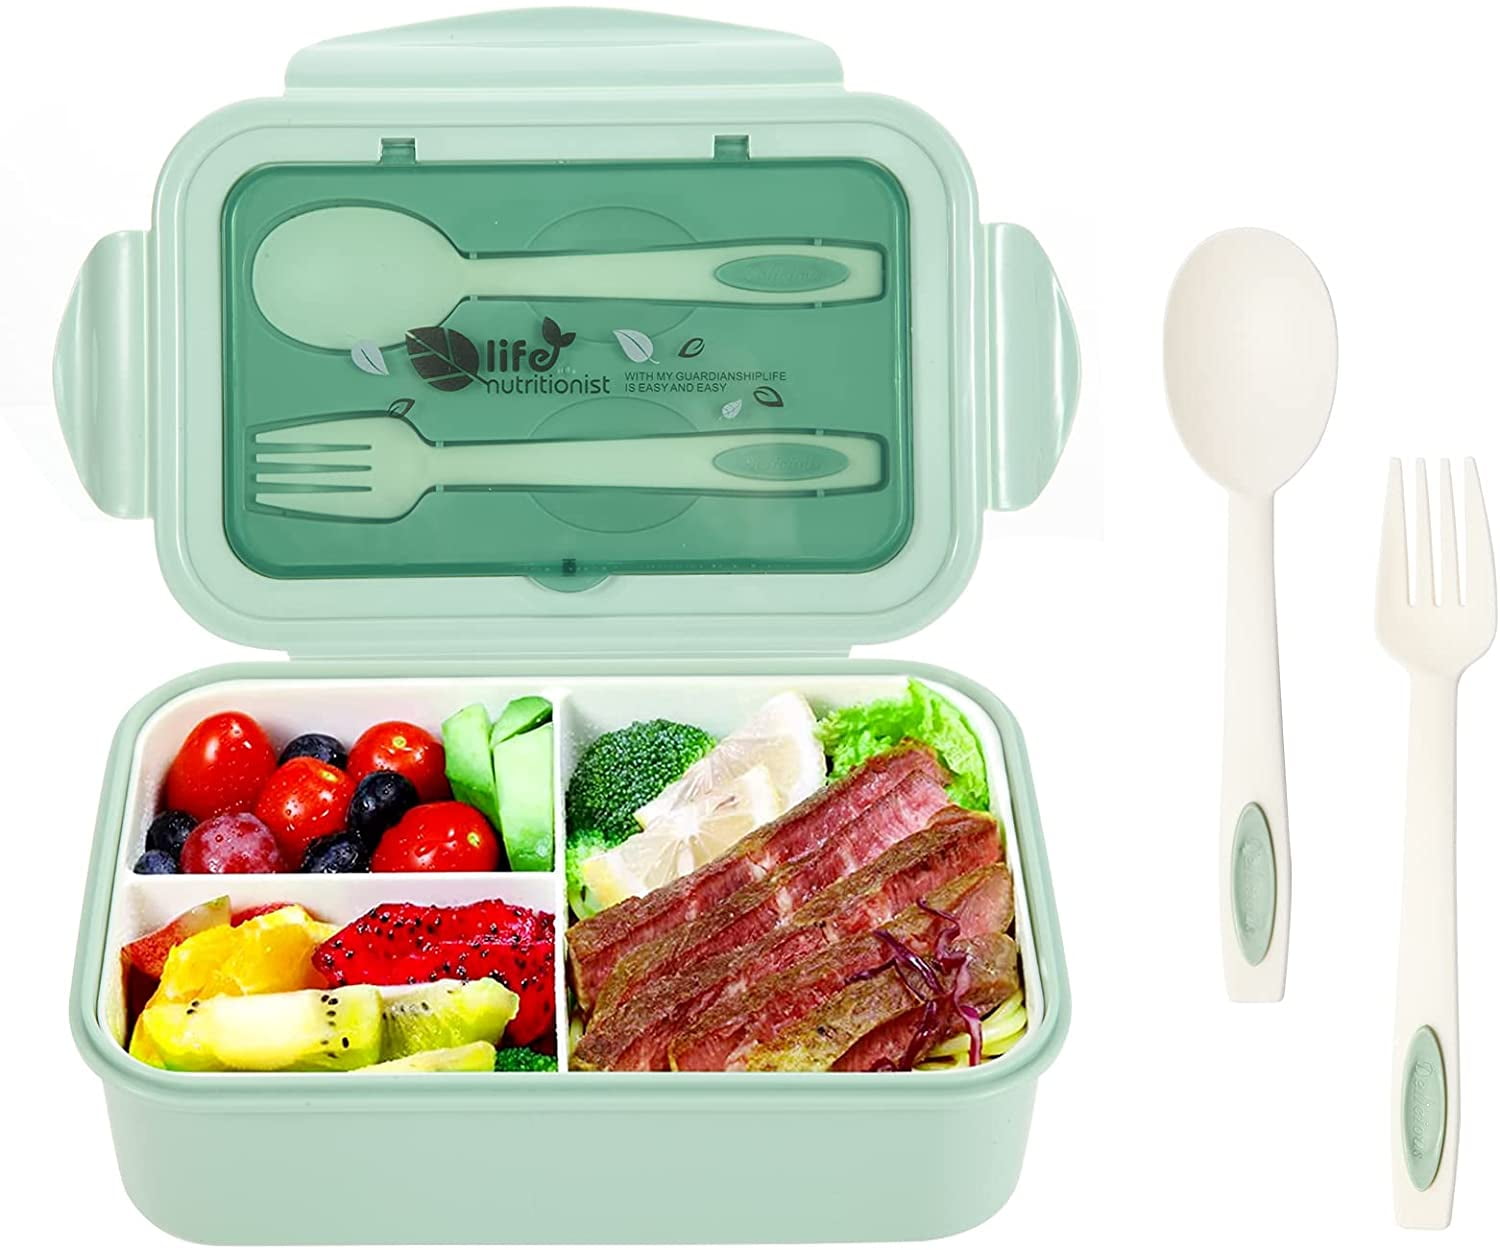 Lnkoo Bento Lunch Box for Kids & Adults with Spoon-Fork Meal Prep Containers Box Microwave-Safe Food Storage Salad Container Box BPA-Free Food Grade